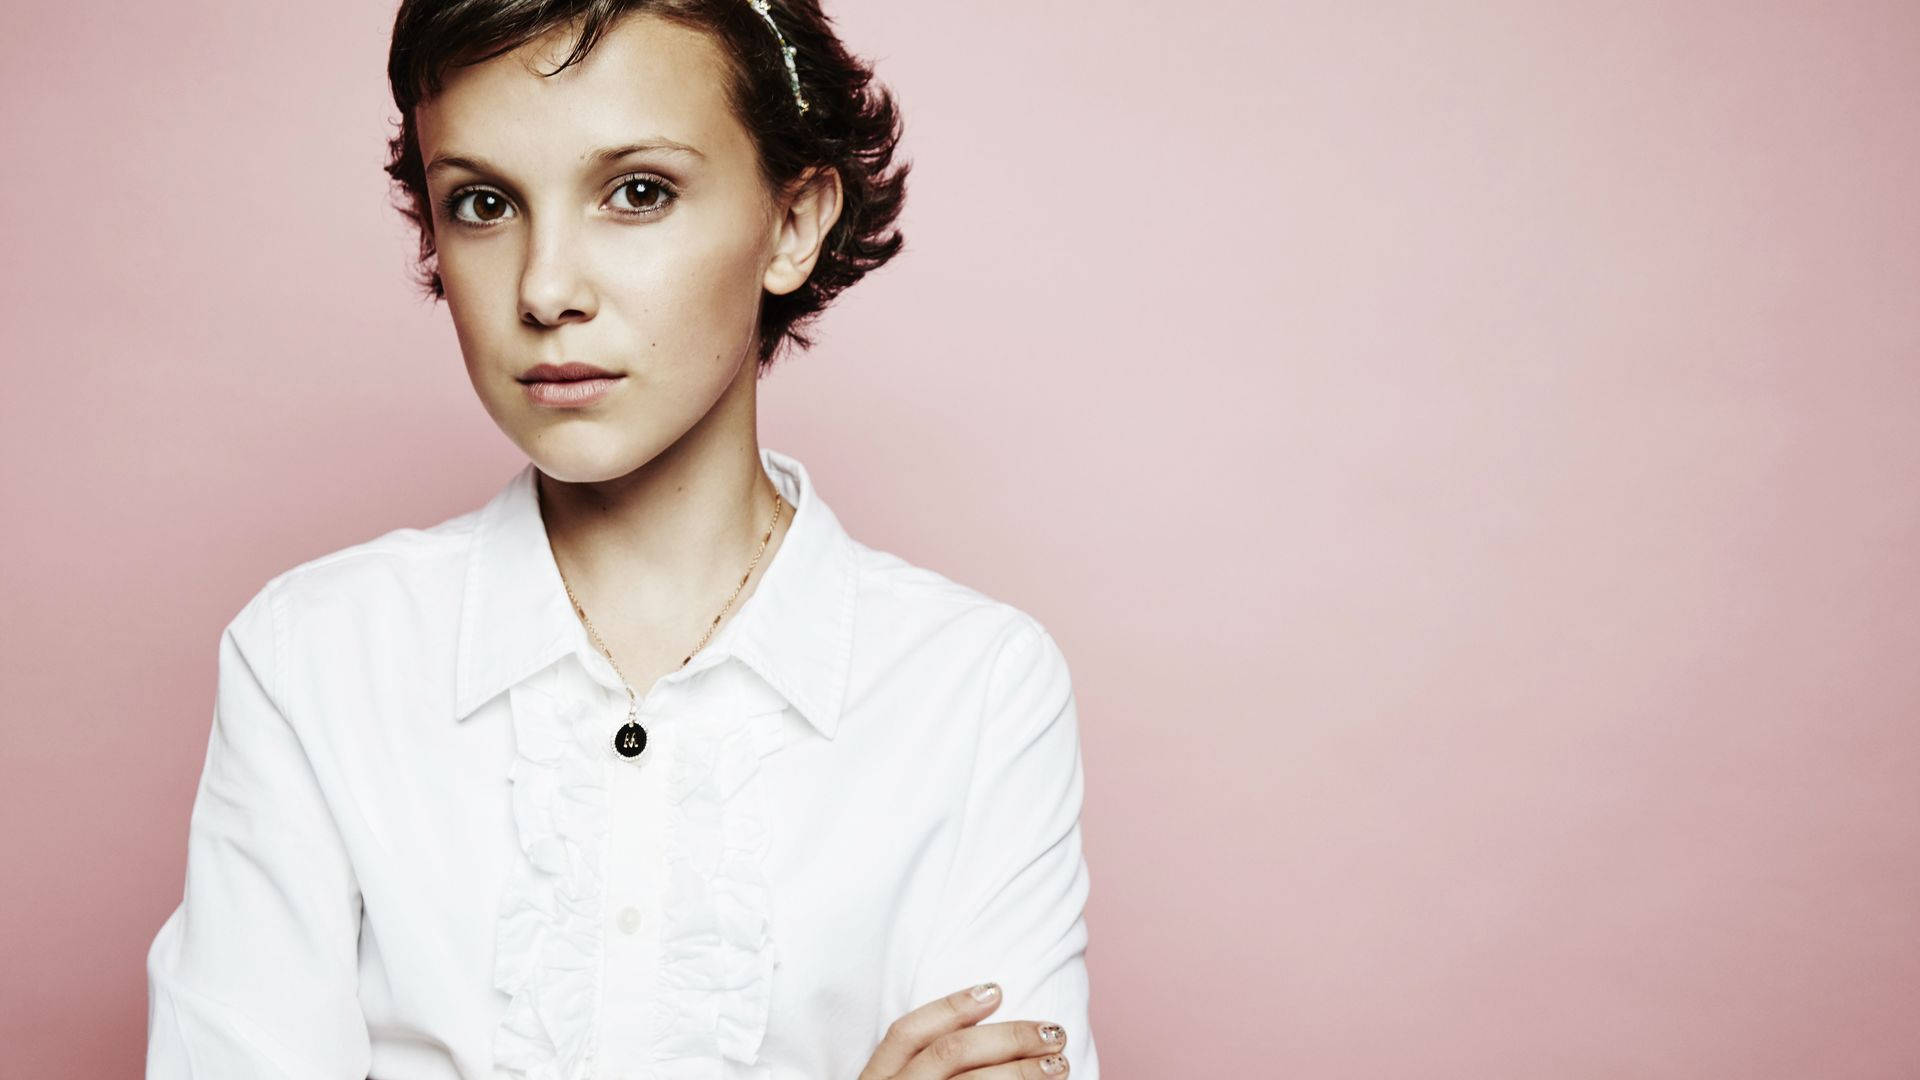 Millie Bobby Brown Showing off a Fierce Look Wallpaper